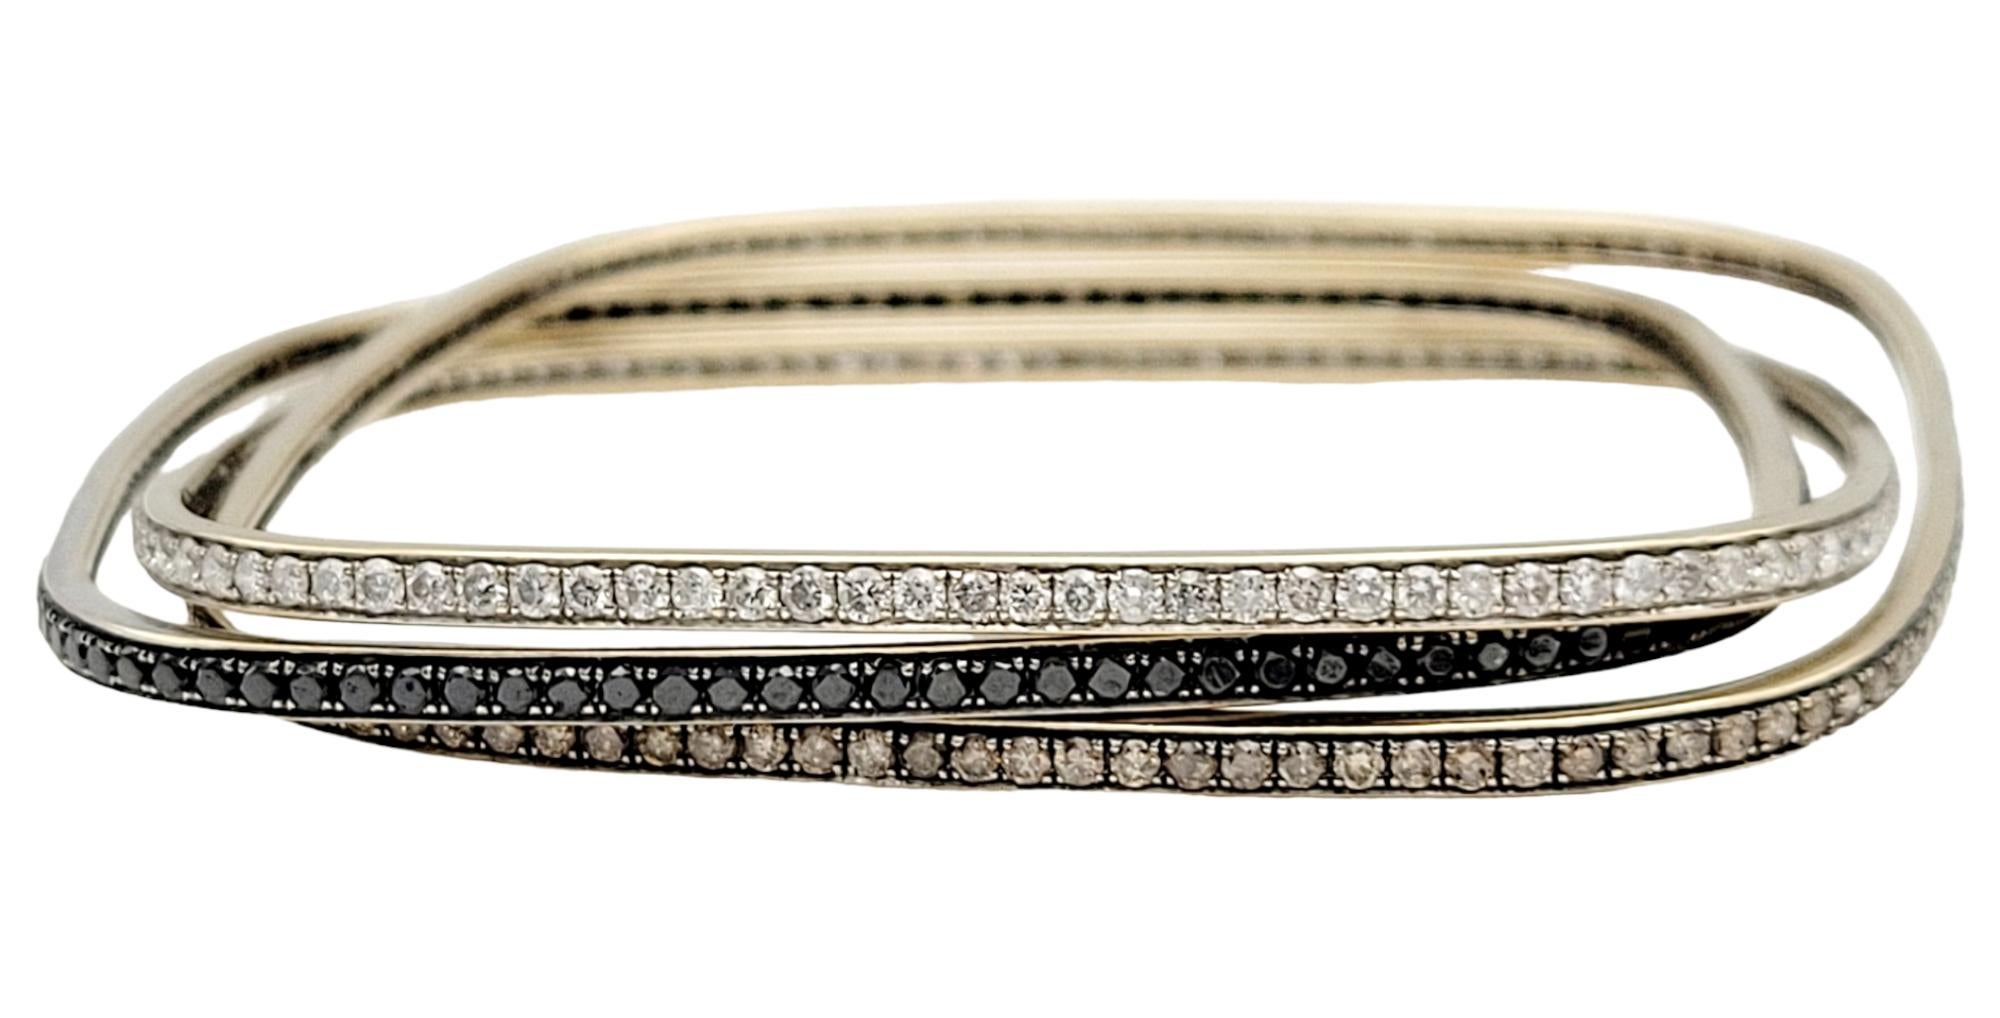 We absolutely love this fabulously stacked sparkling diamond bangle set! Simple yet stunning, the multi-toned natural diamonds wrap the wrist in contemporary elegance. 

Featured here is a trio of square shaped diamond bangles. Each bangle is unique